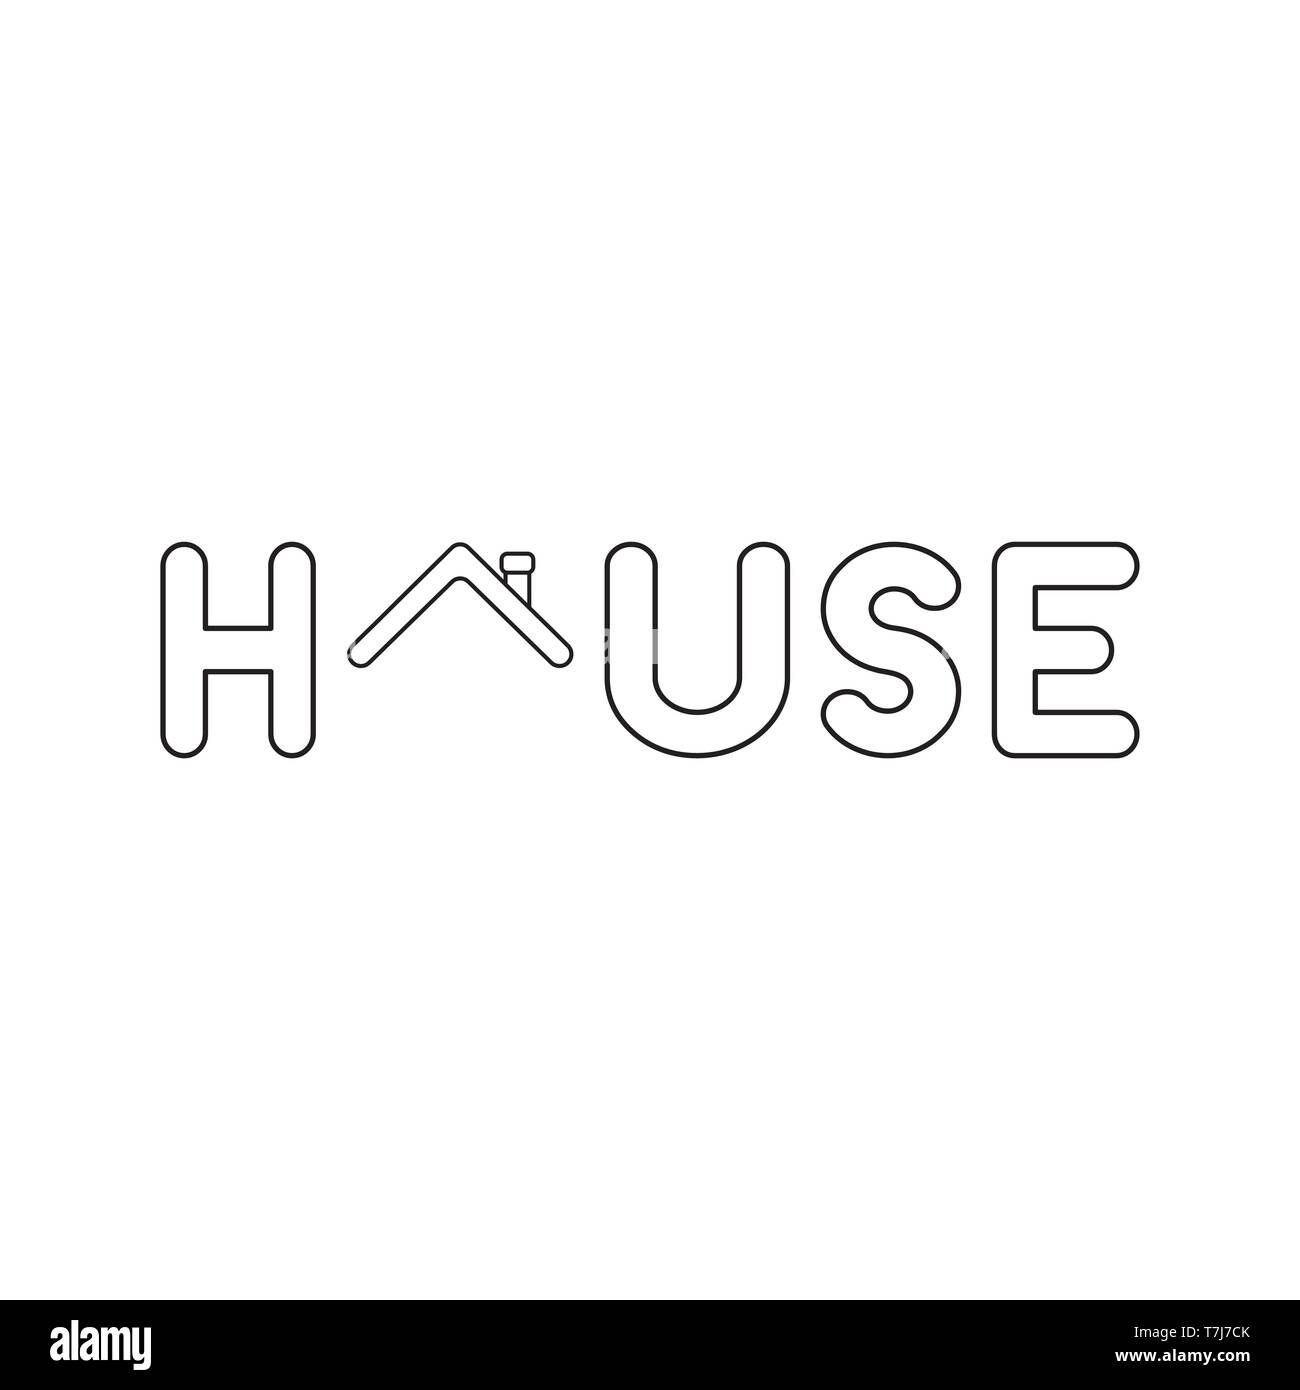 Vector icon concept of house word with house roof. Black outlines. Stock Vector